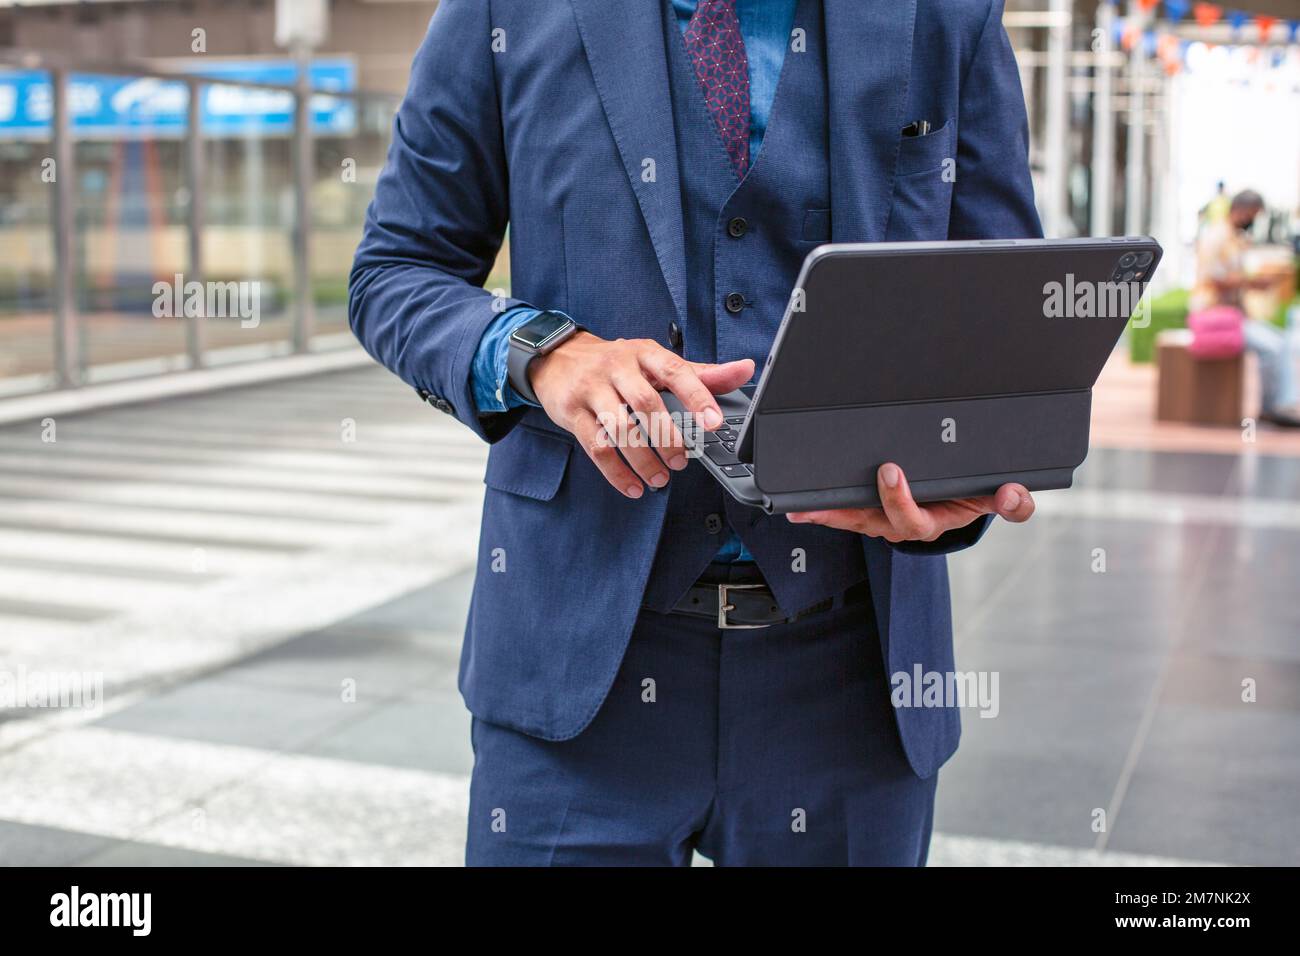 A young businessman in a blue suit on the move in a city downtown area, standing and using his digital tablet. Stock Photo